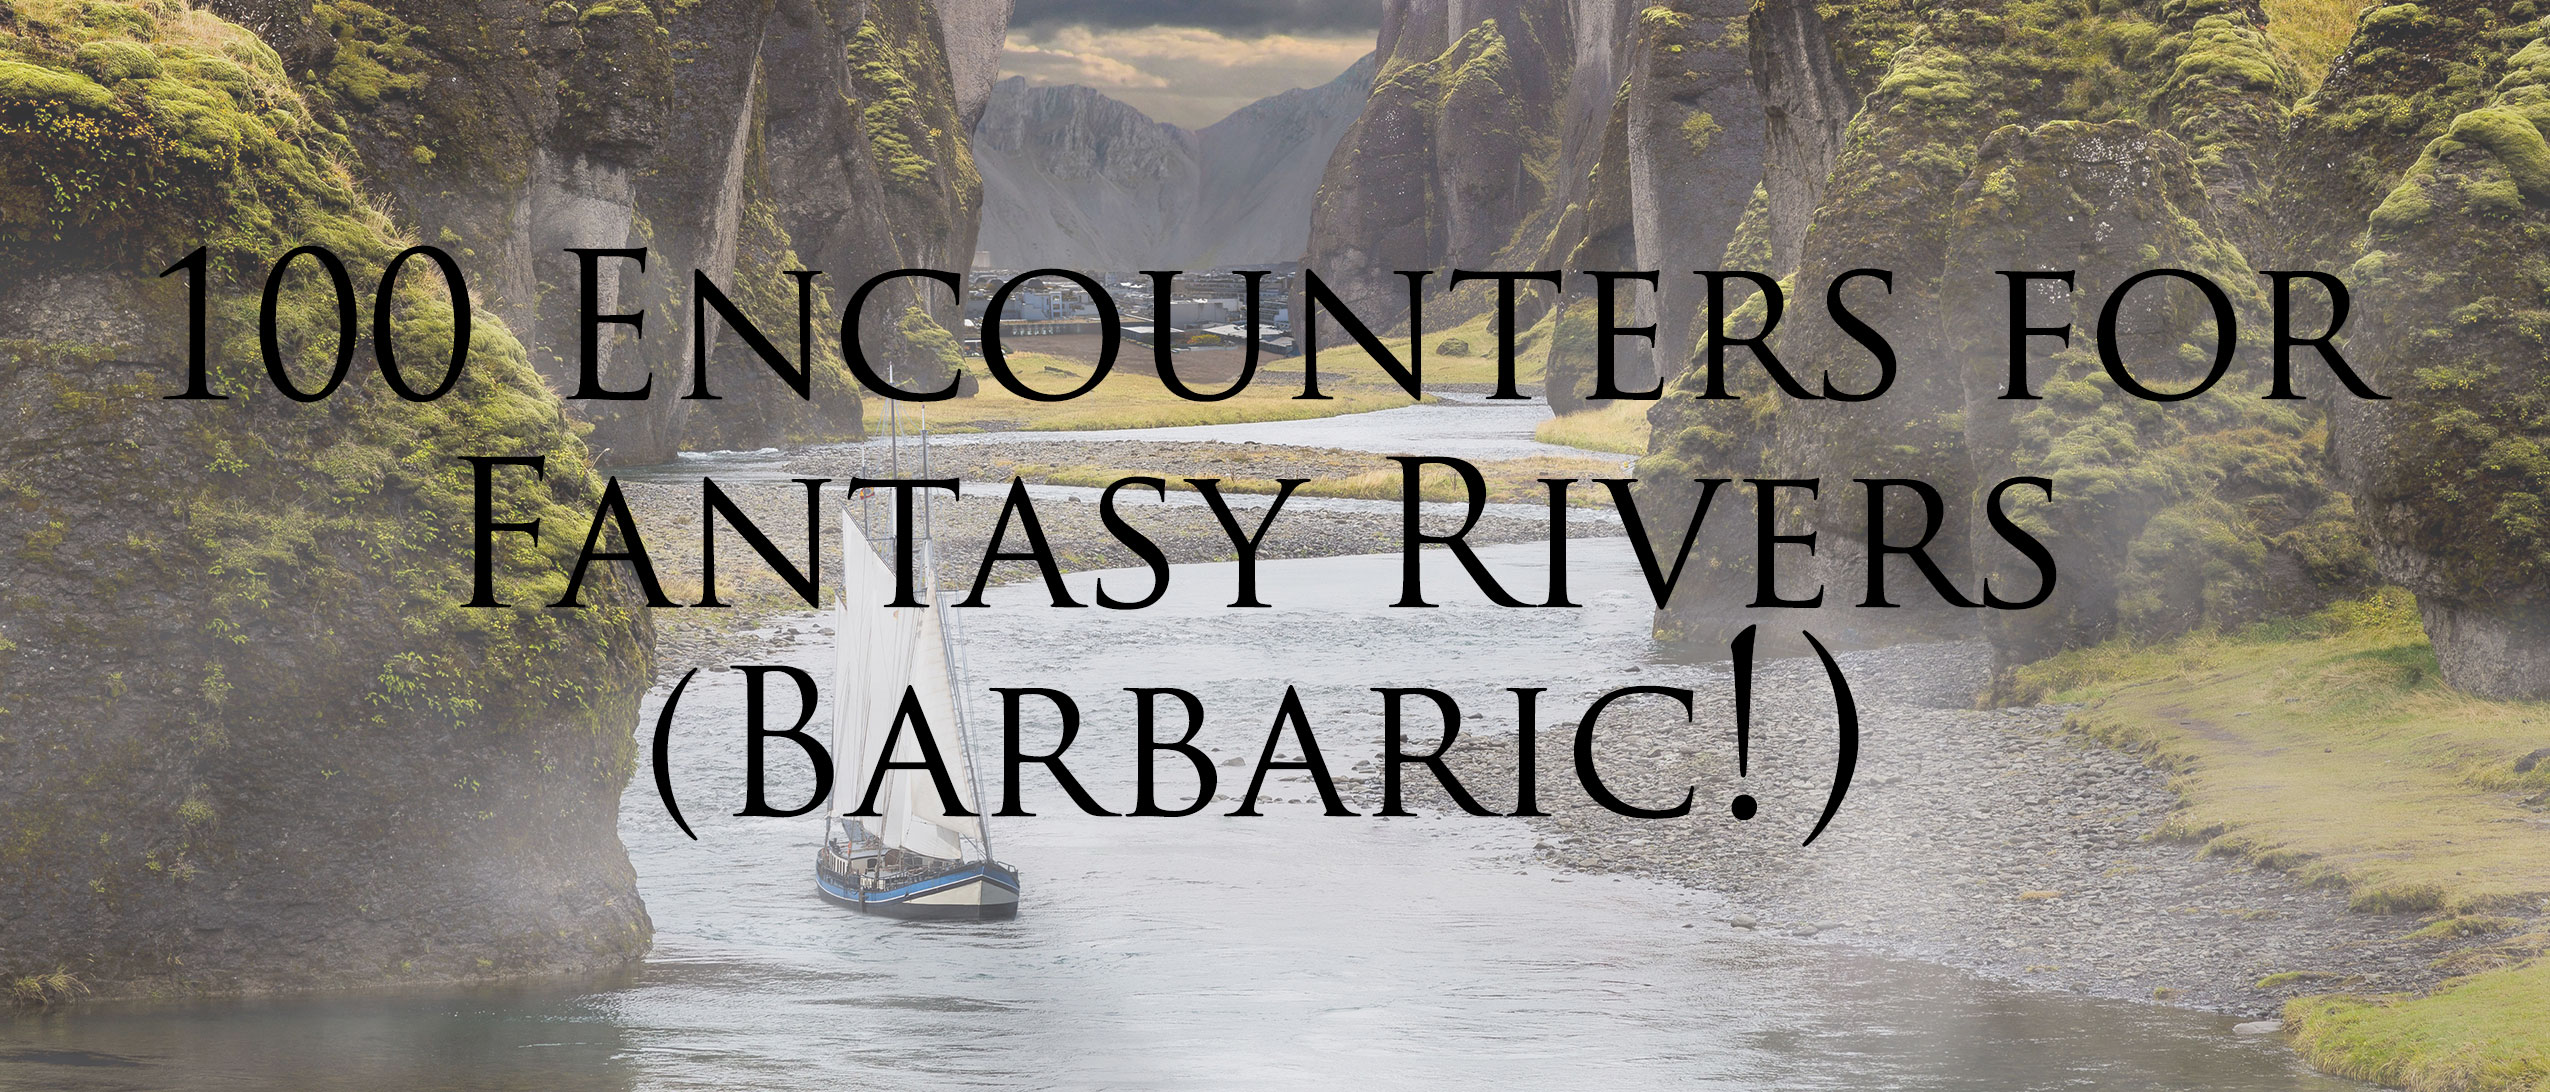 100 Encounters for Fantasy Rivers (Barbaric!)